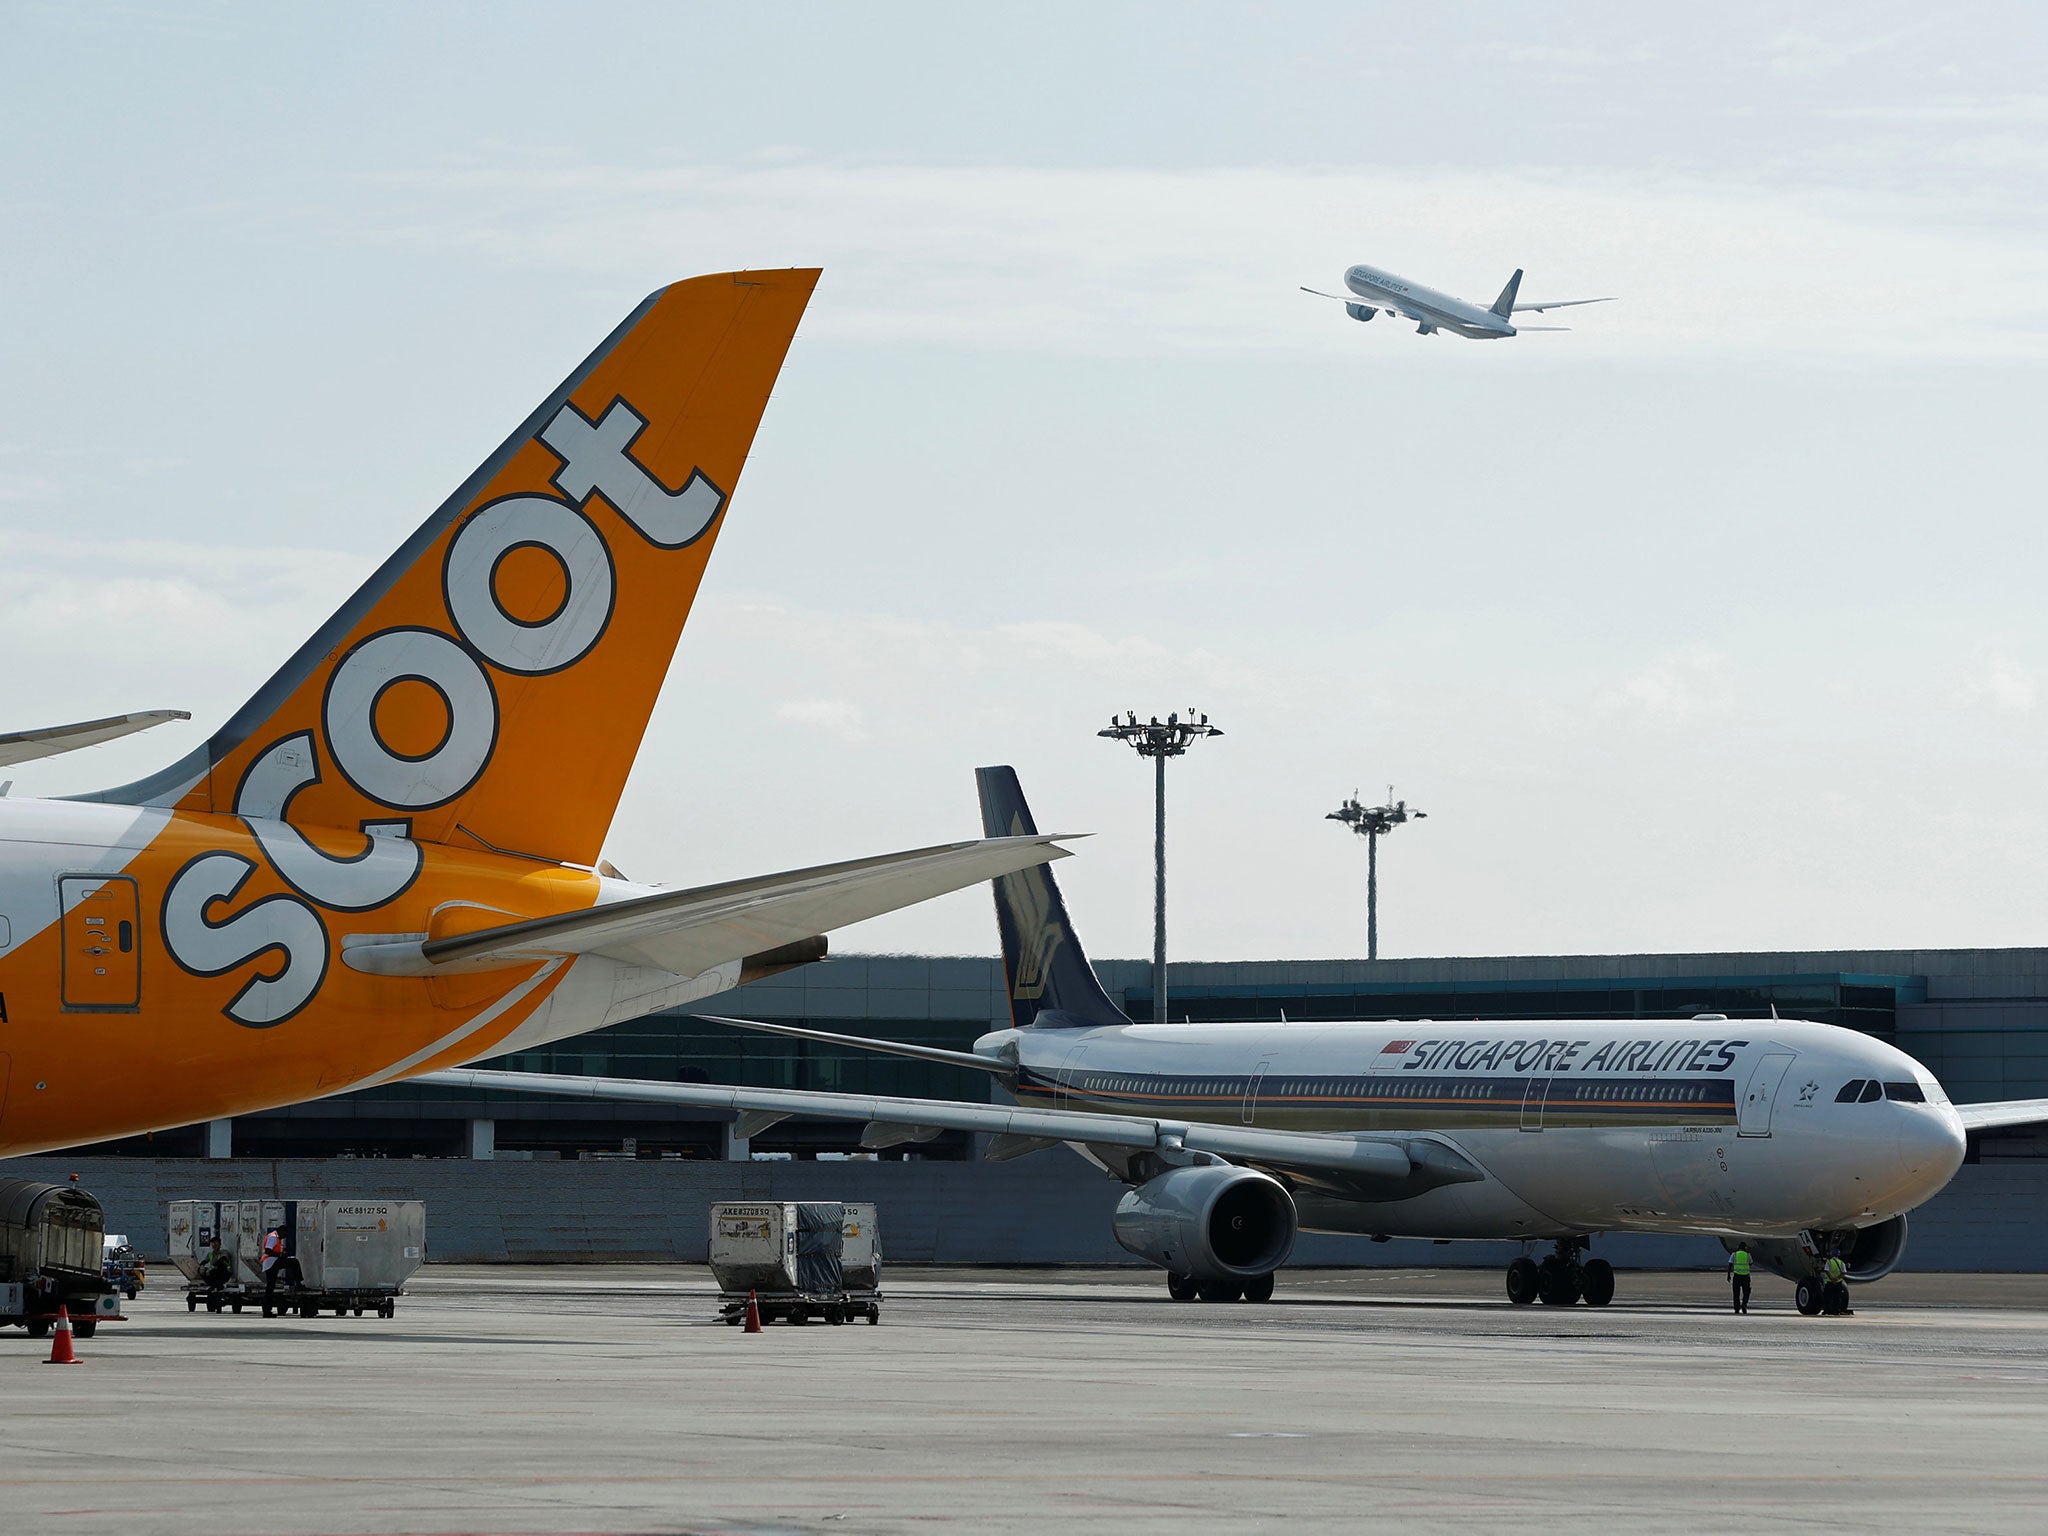 A Singapore Airlines plane takes off, above a Scoot plane and another Singapore Airlines plane on the tarmac, at Changi Airport